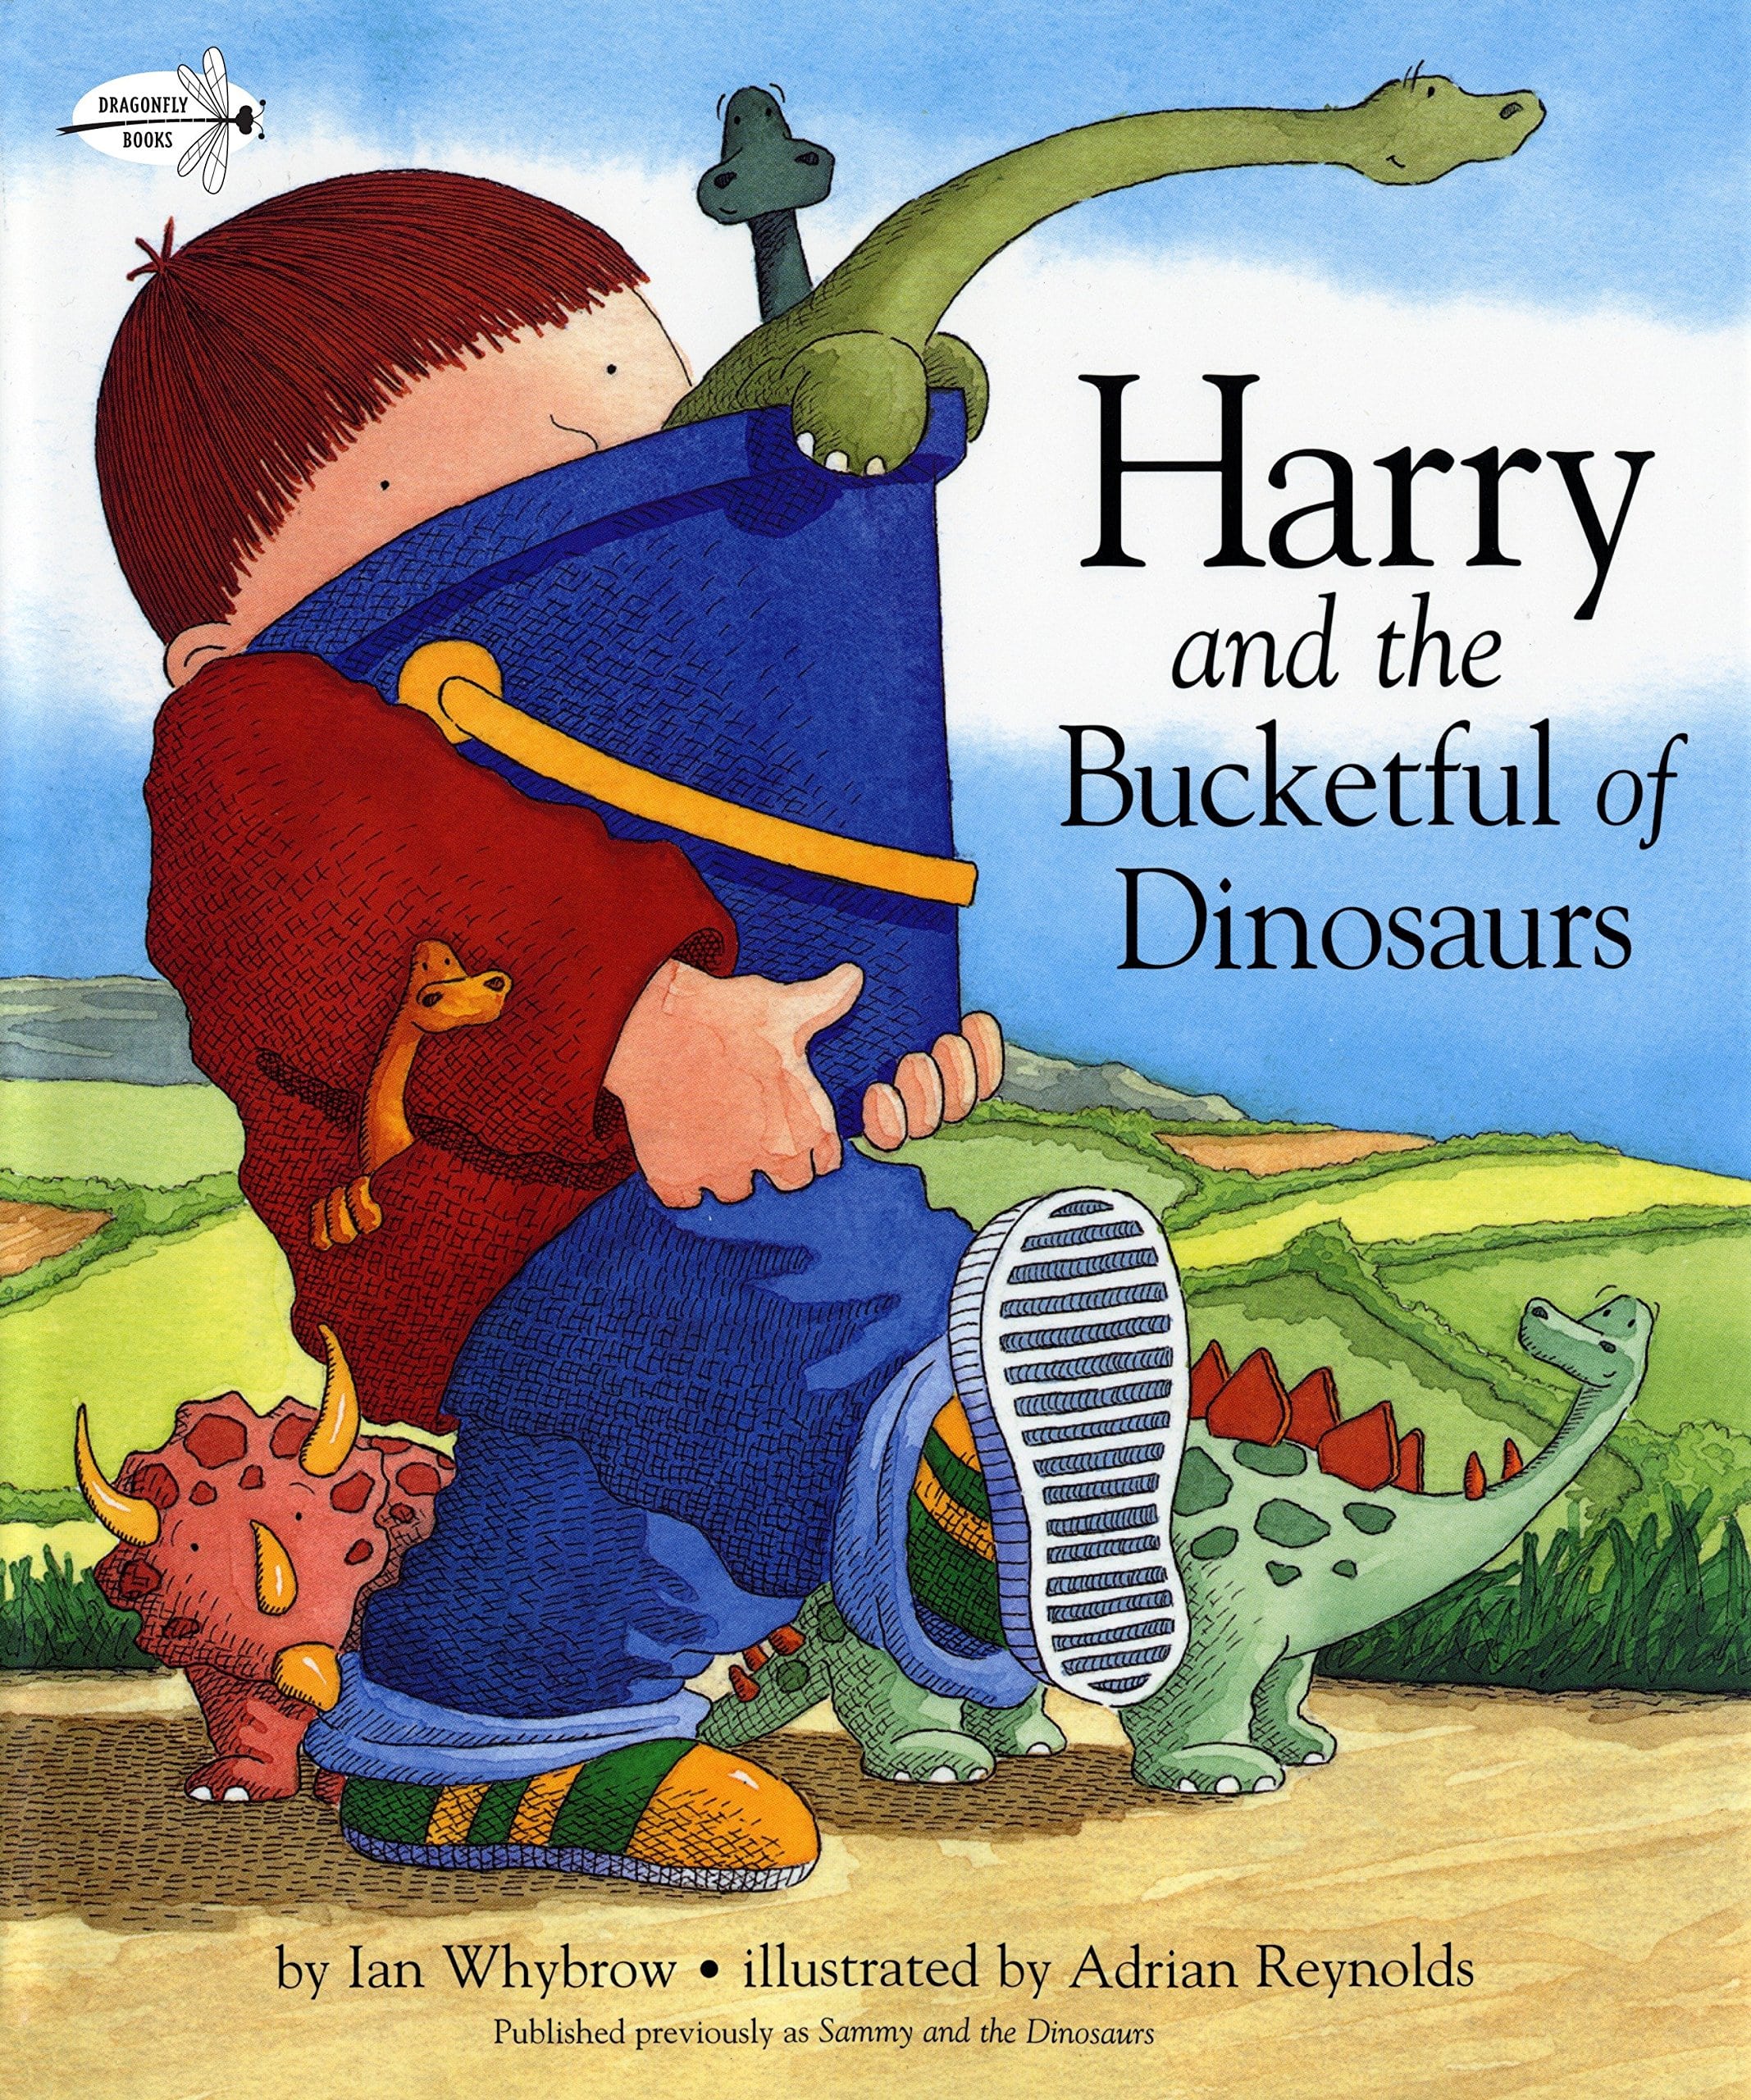 IMG : Harry And The Bucketful Of Dinosaurs